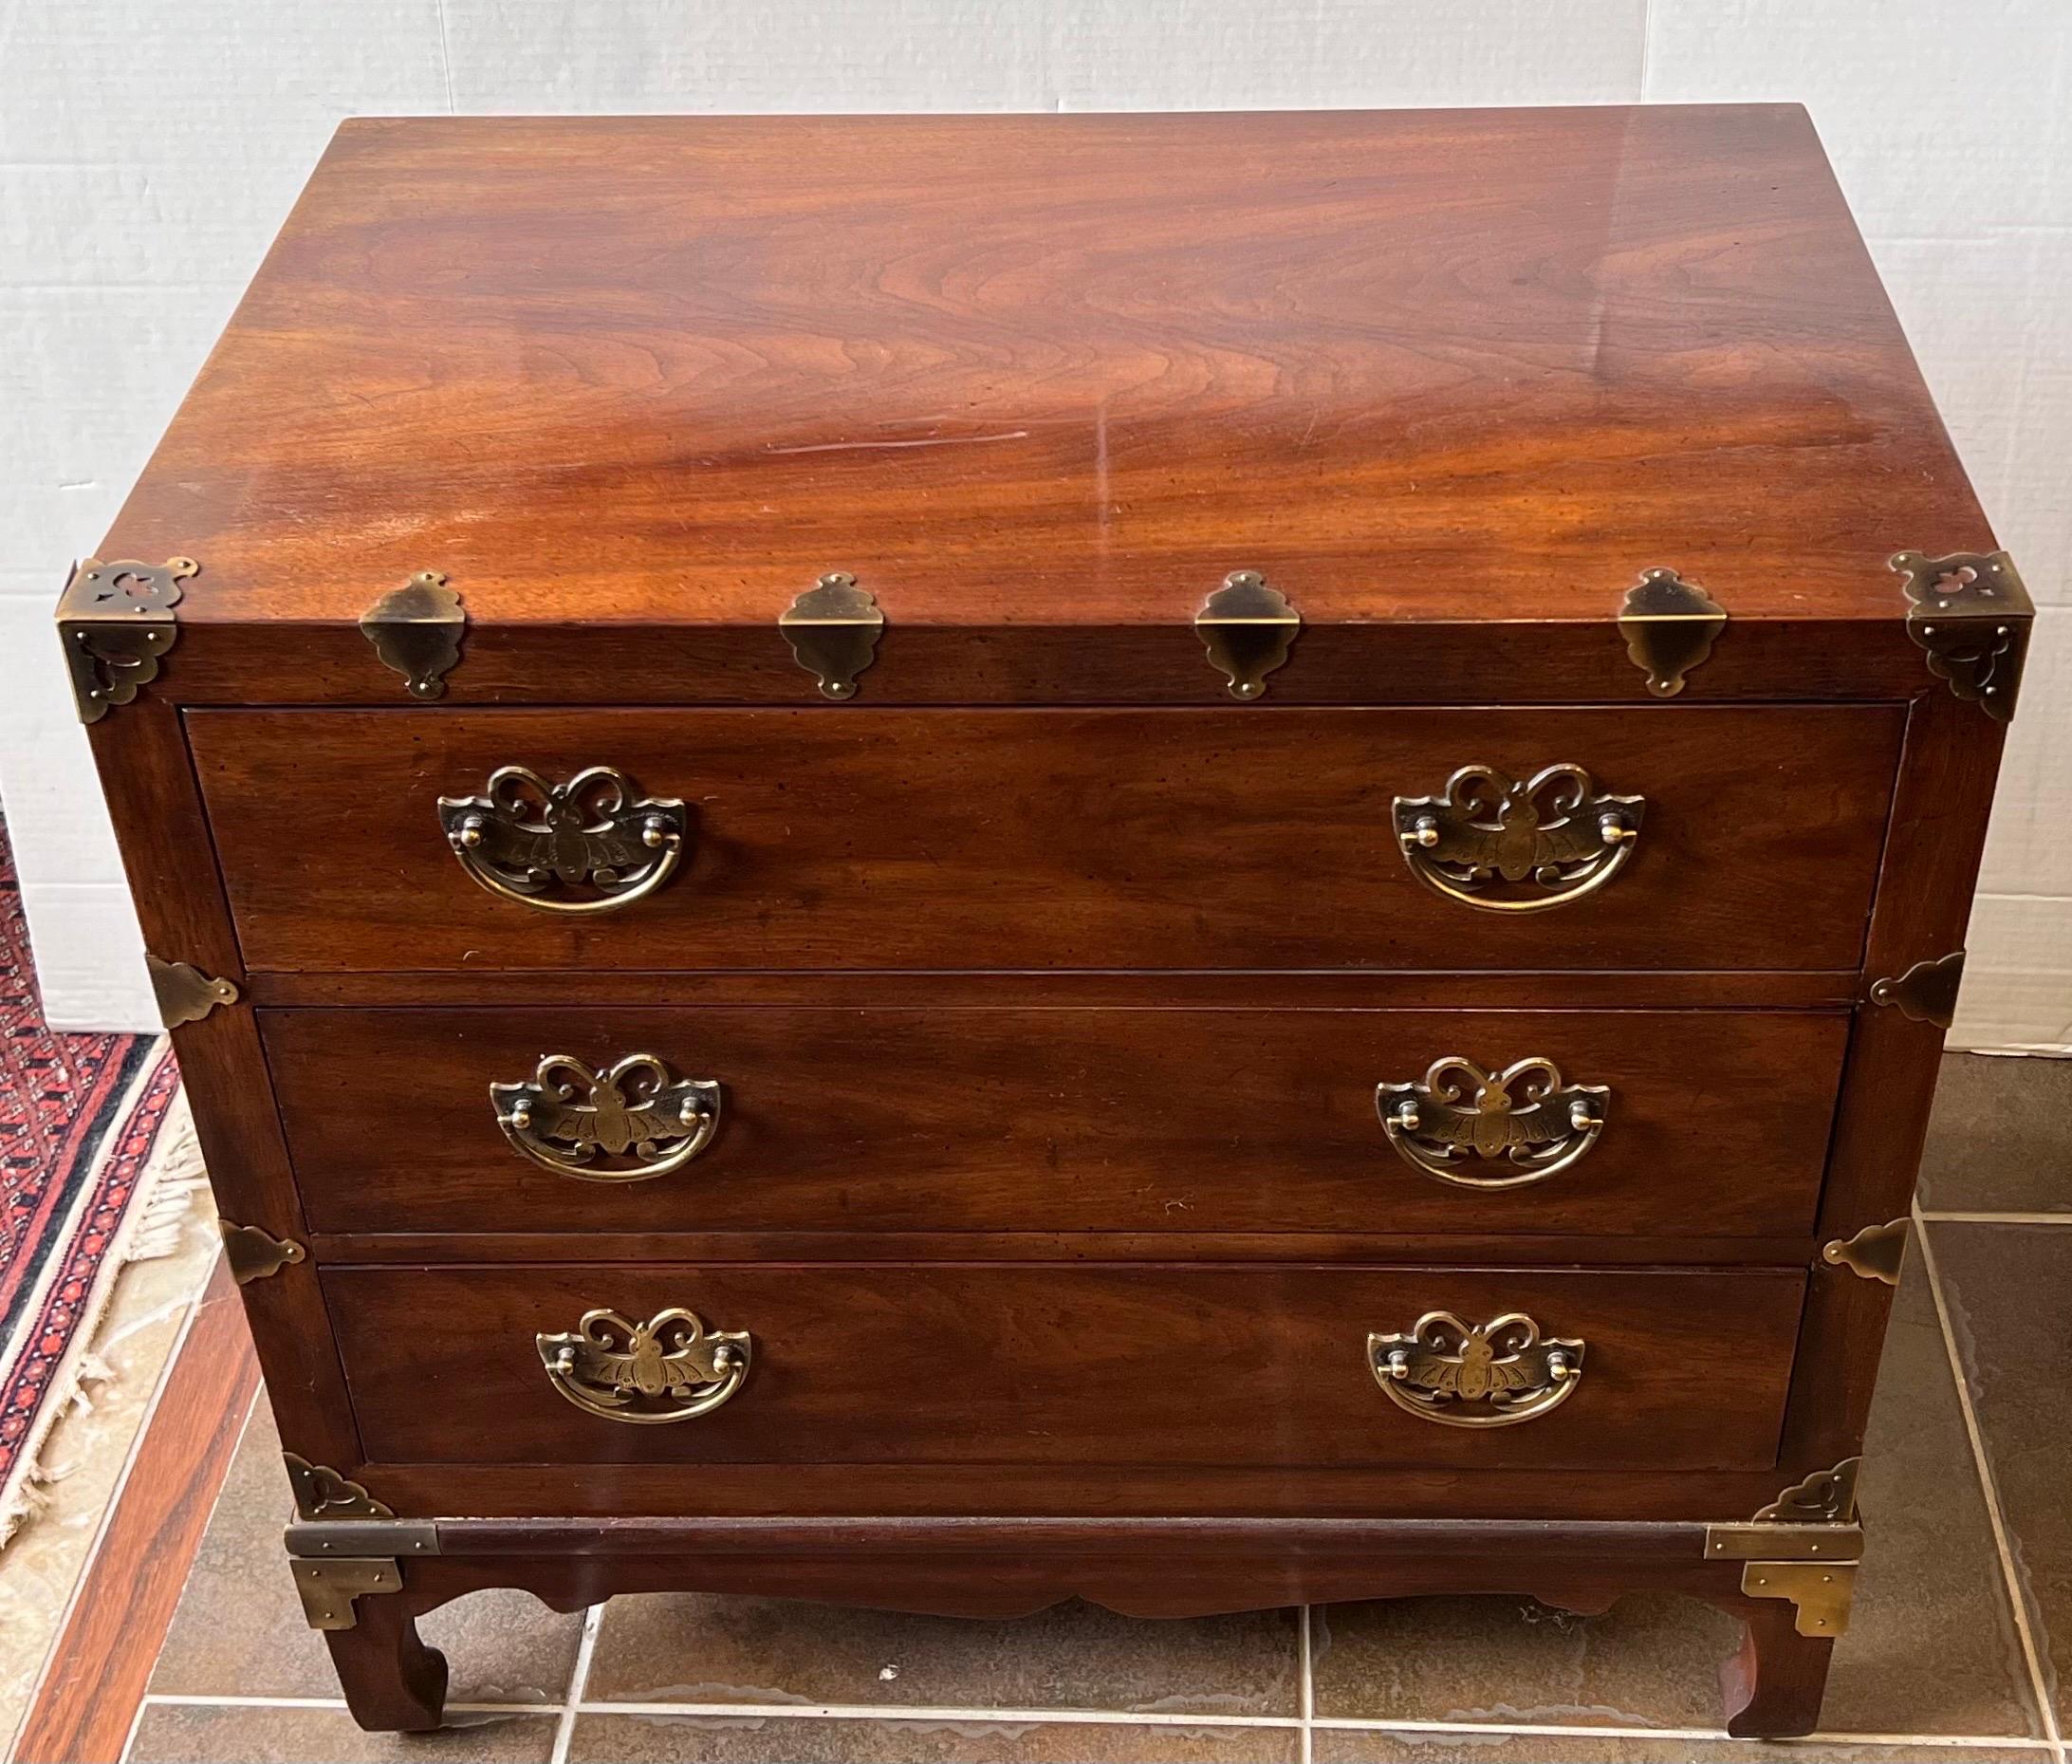 Stunning small chinoiserie styled three drawer chest of drawers with original brass butterfly shaped pulls and brass detail.  All Henredon hallmarks are present.